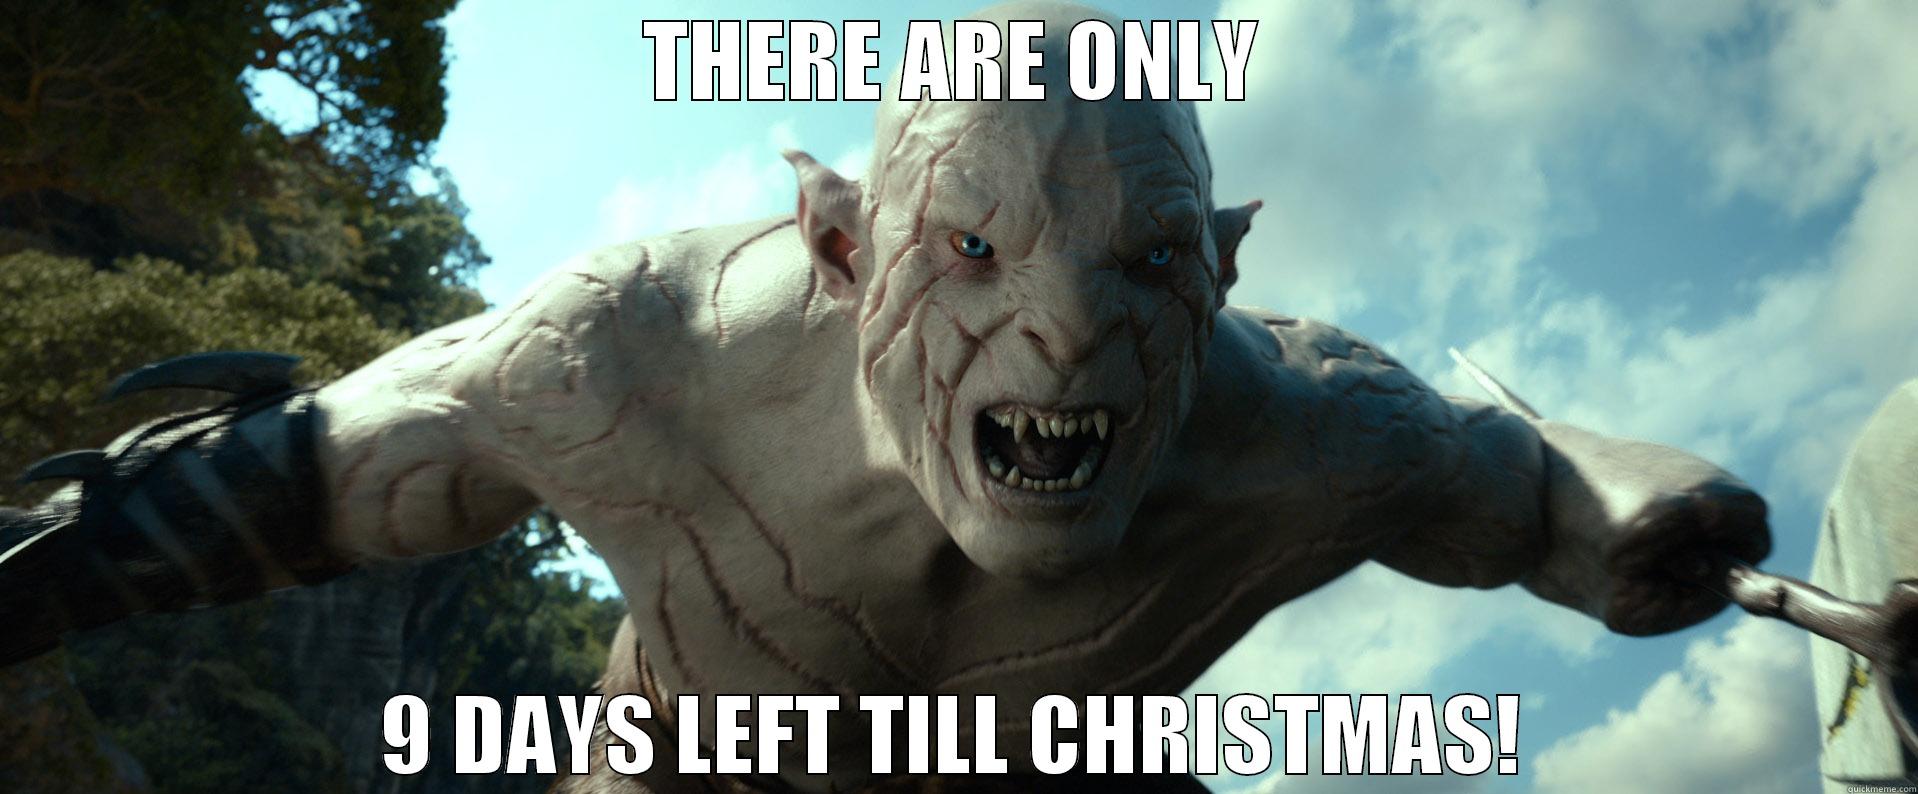 THERE ARE ONLY 9 DAYS LEFT TILL CHRISTMAS! Misc